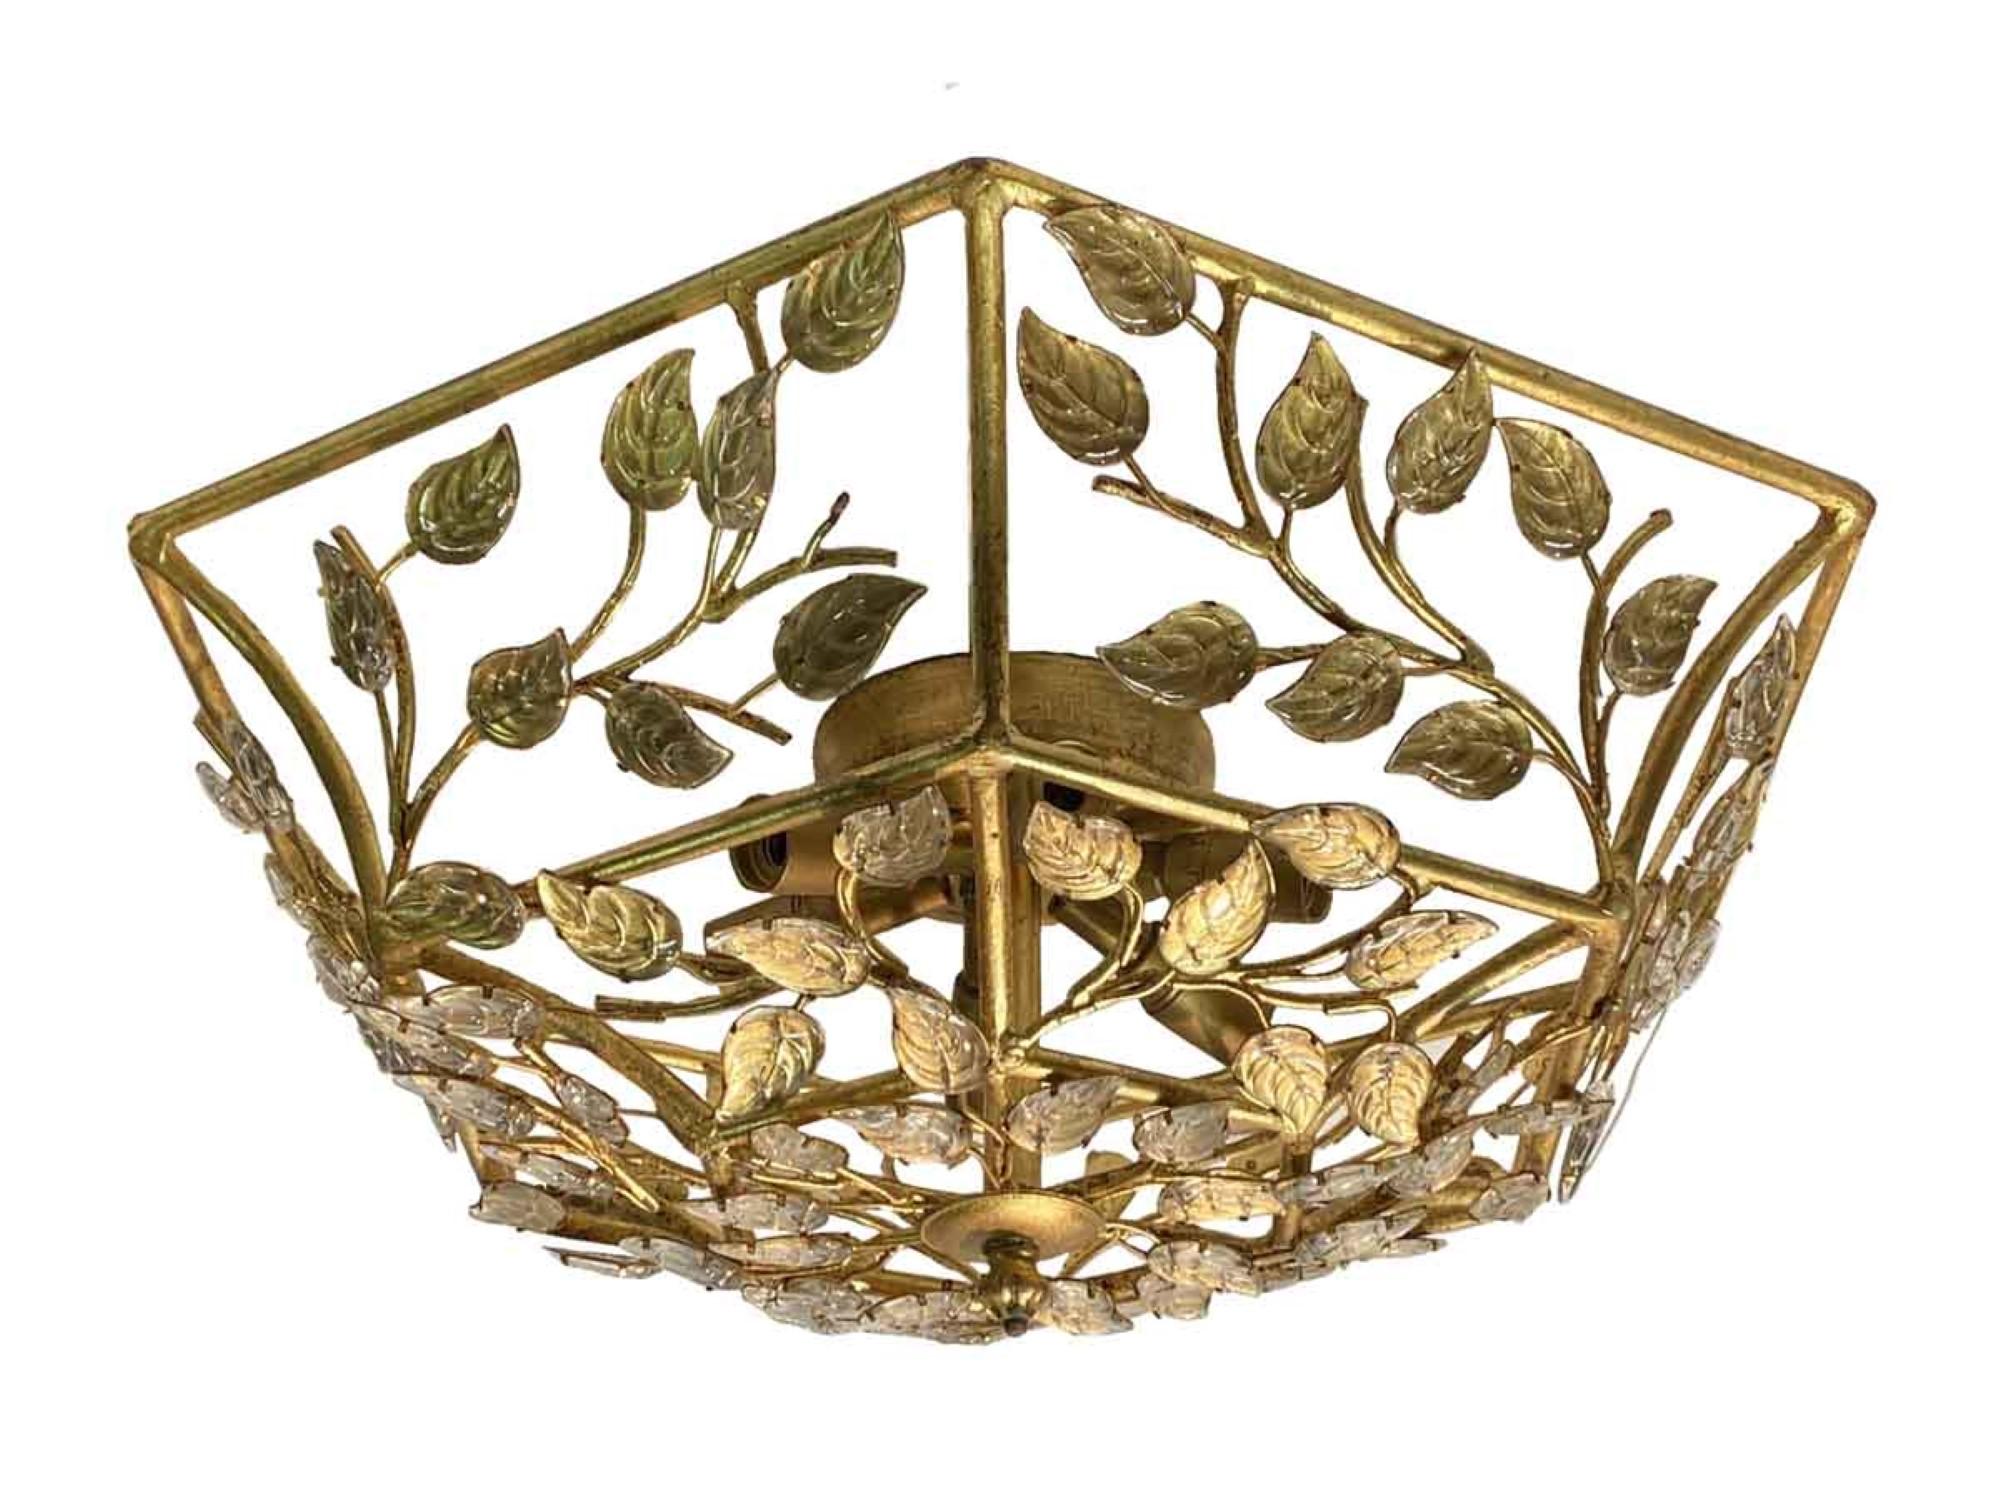 2000s Baguès style wrought iron flush mount light with floral branches, crystal leaves and a gilded finish. Price includes restoration. Small quantity available at time of posting. Priced each. This can be viewed at our Scranton, Pennsylvania